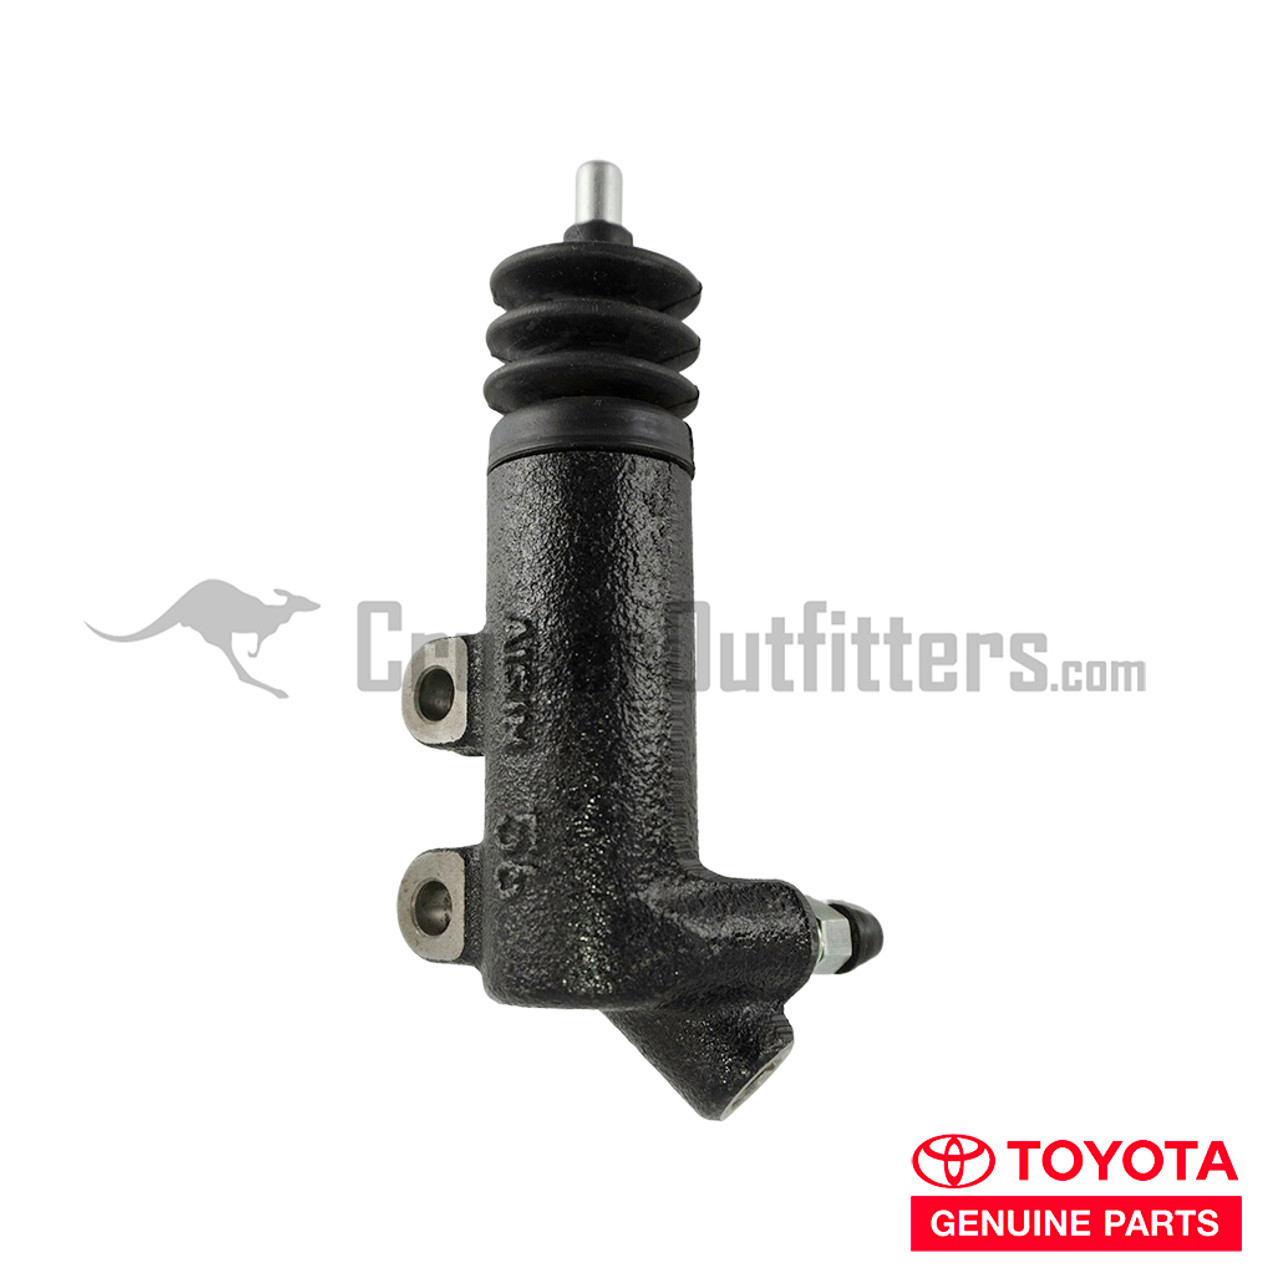 Clutch Slave Cylinder - Fits BJ 7x w/Boosted Master Cylinder (CSN60130OEM)